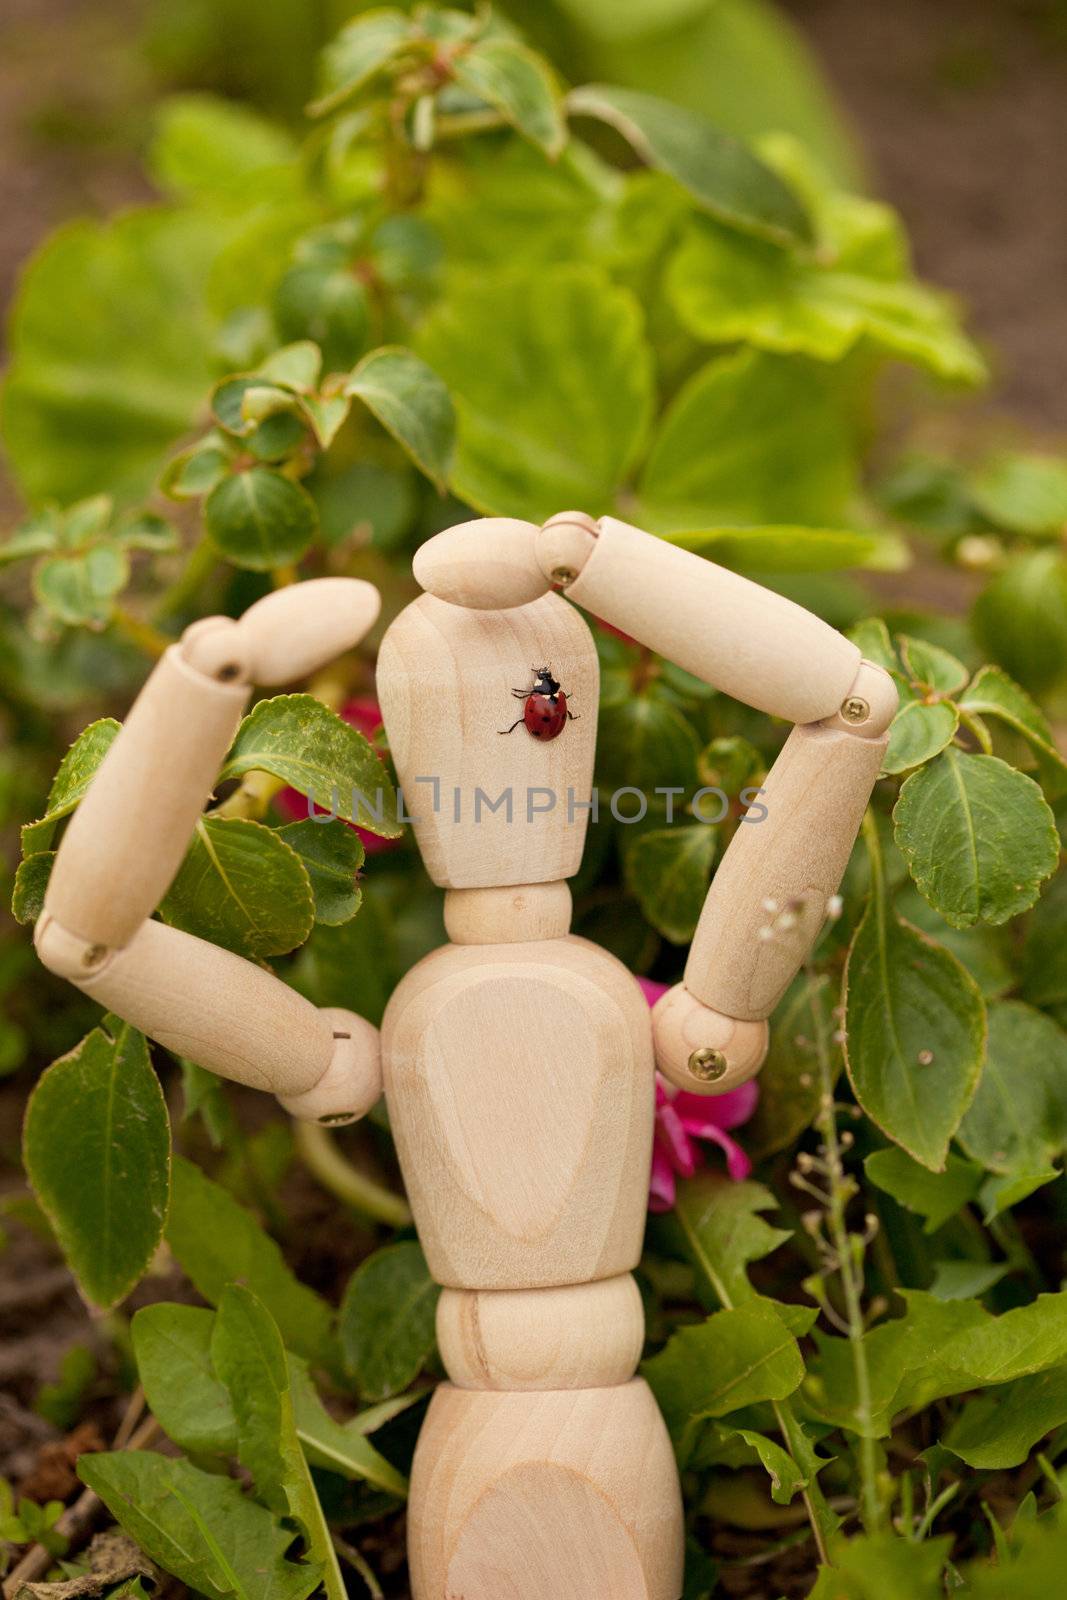 The ladybird sits on the toy wooden man